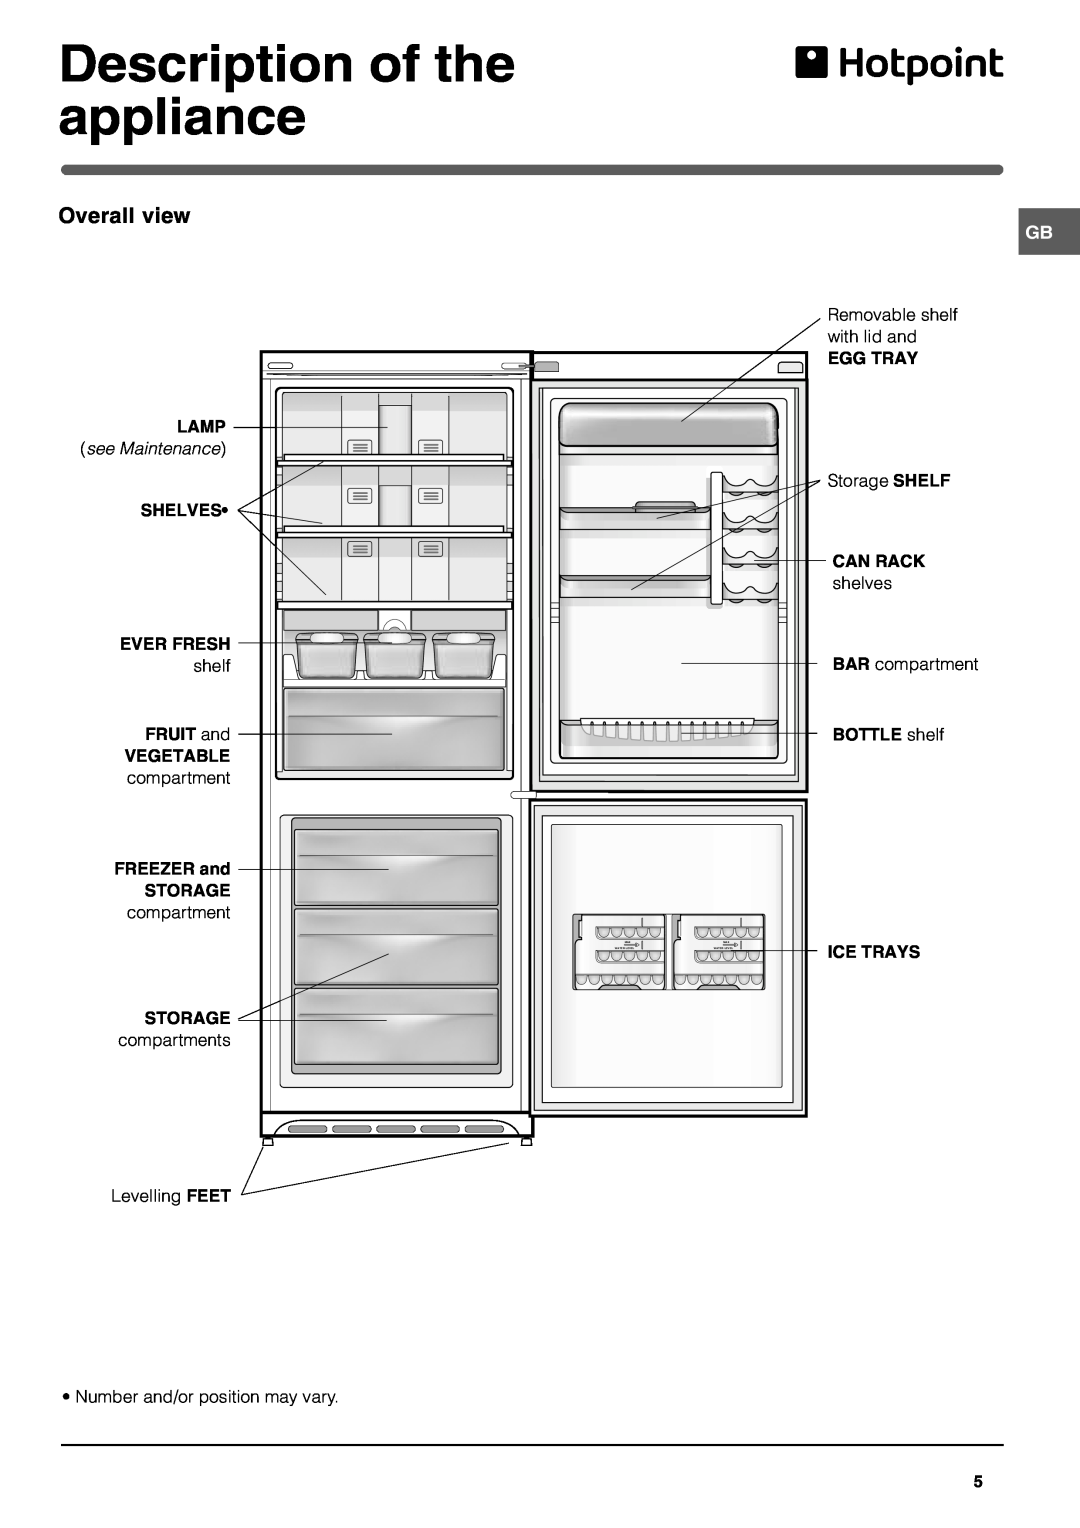 Hotpoint FFA46W Description of the appliance, Egg Tray, Lamp, see Maintenance, Shelves, Can Rack, Ever Fresh, FRUIT and 